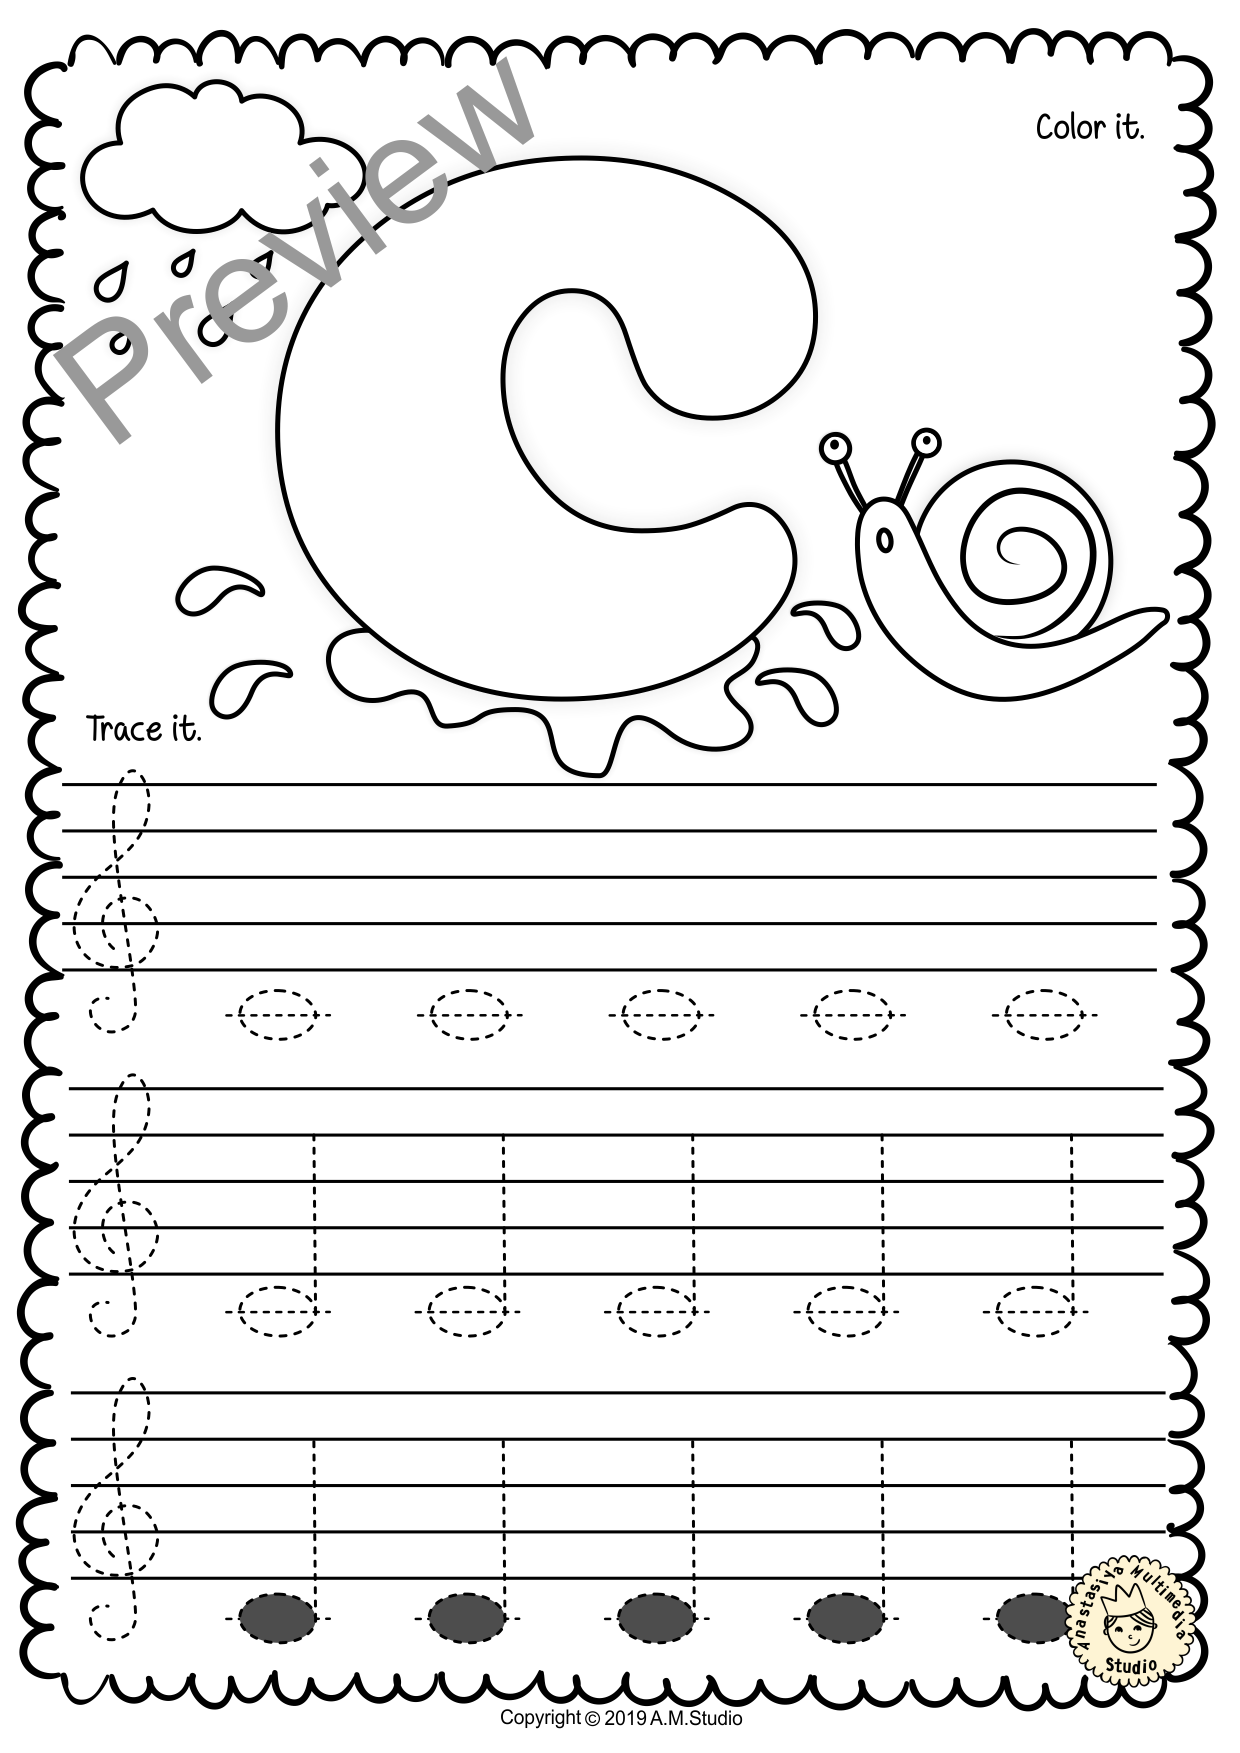 Treble Clef Tracing Music Notes Worksheets for Spring (img # 1)